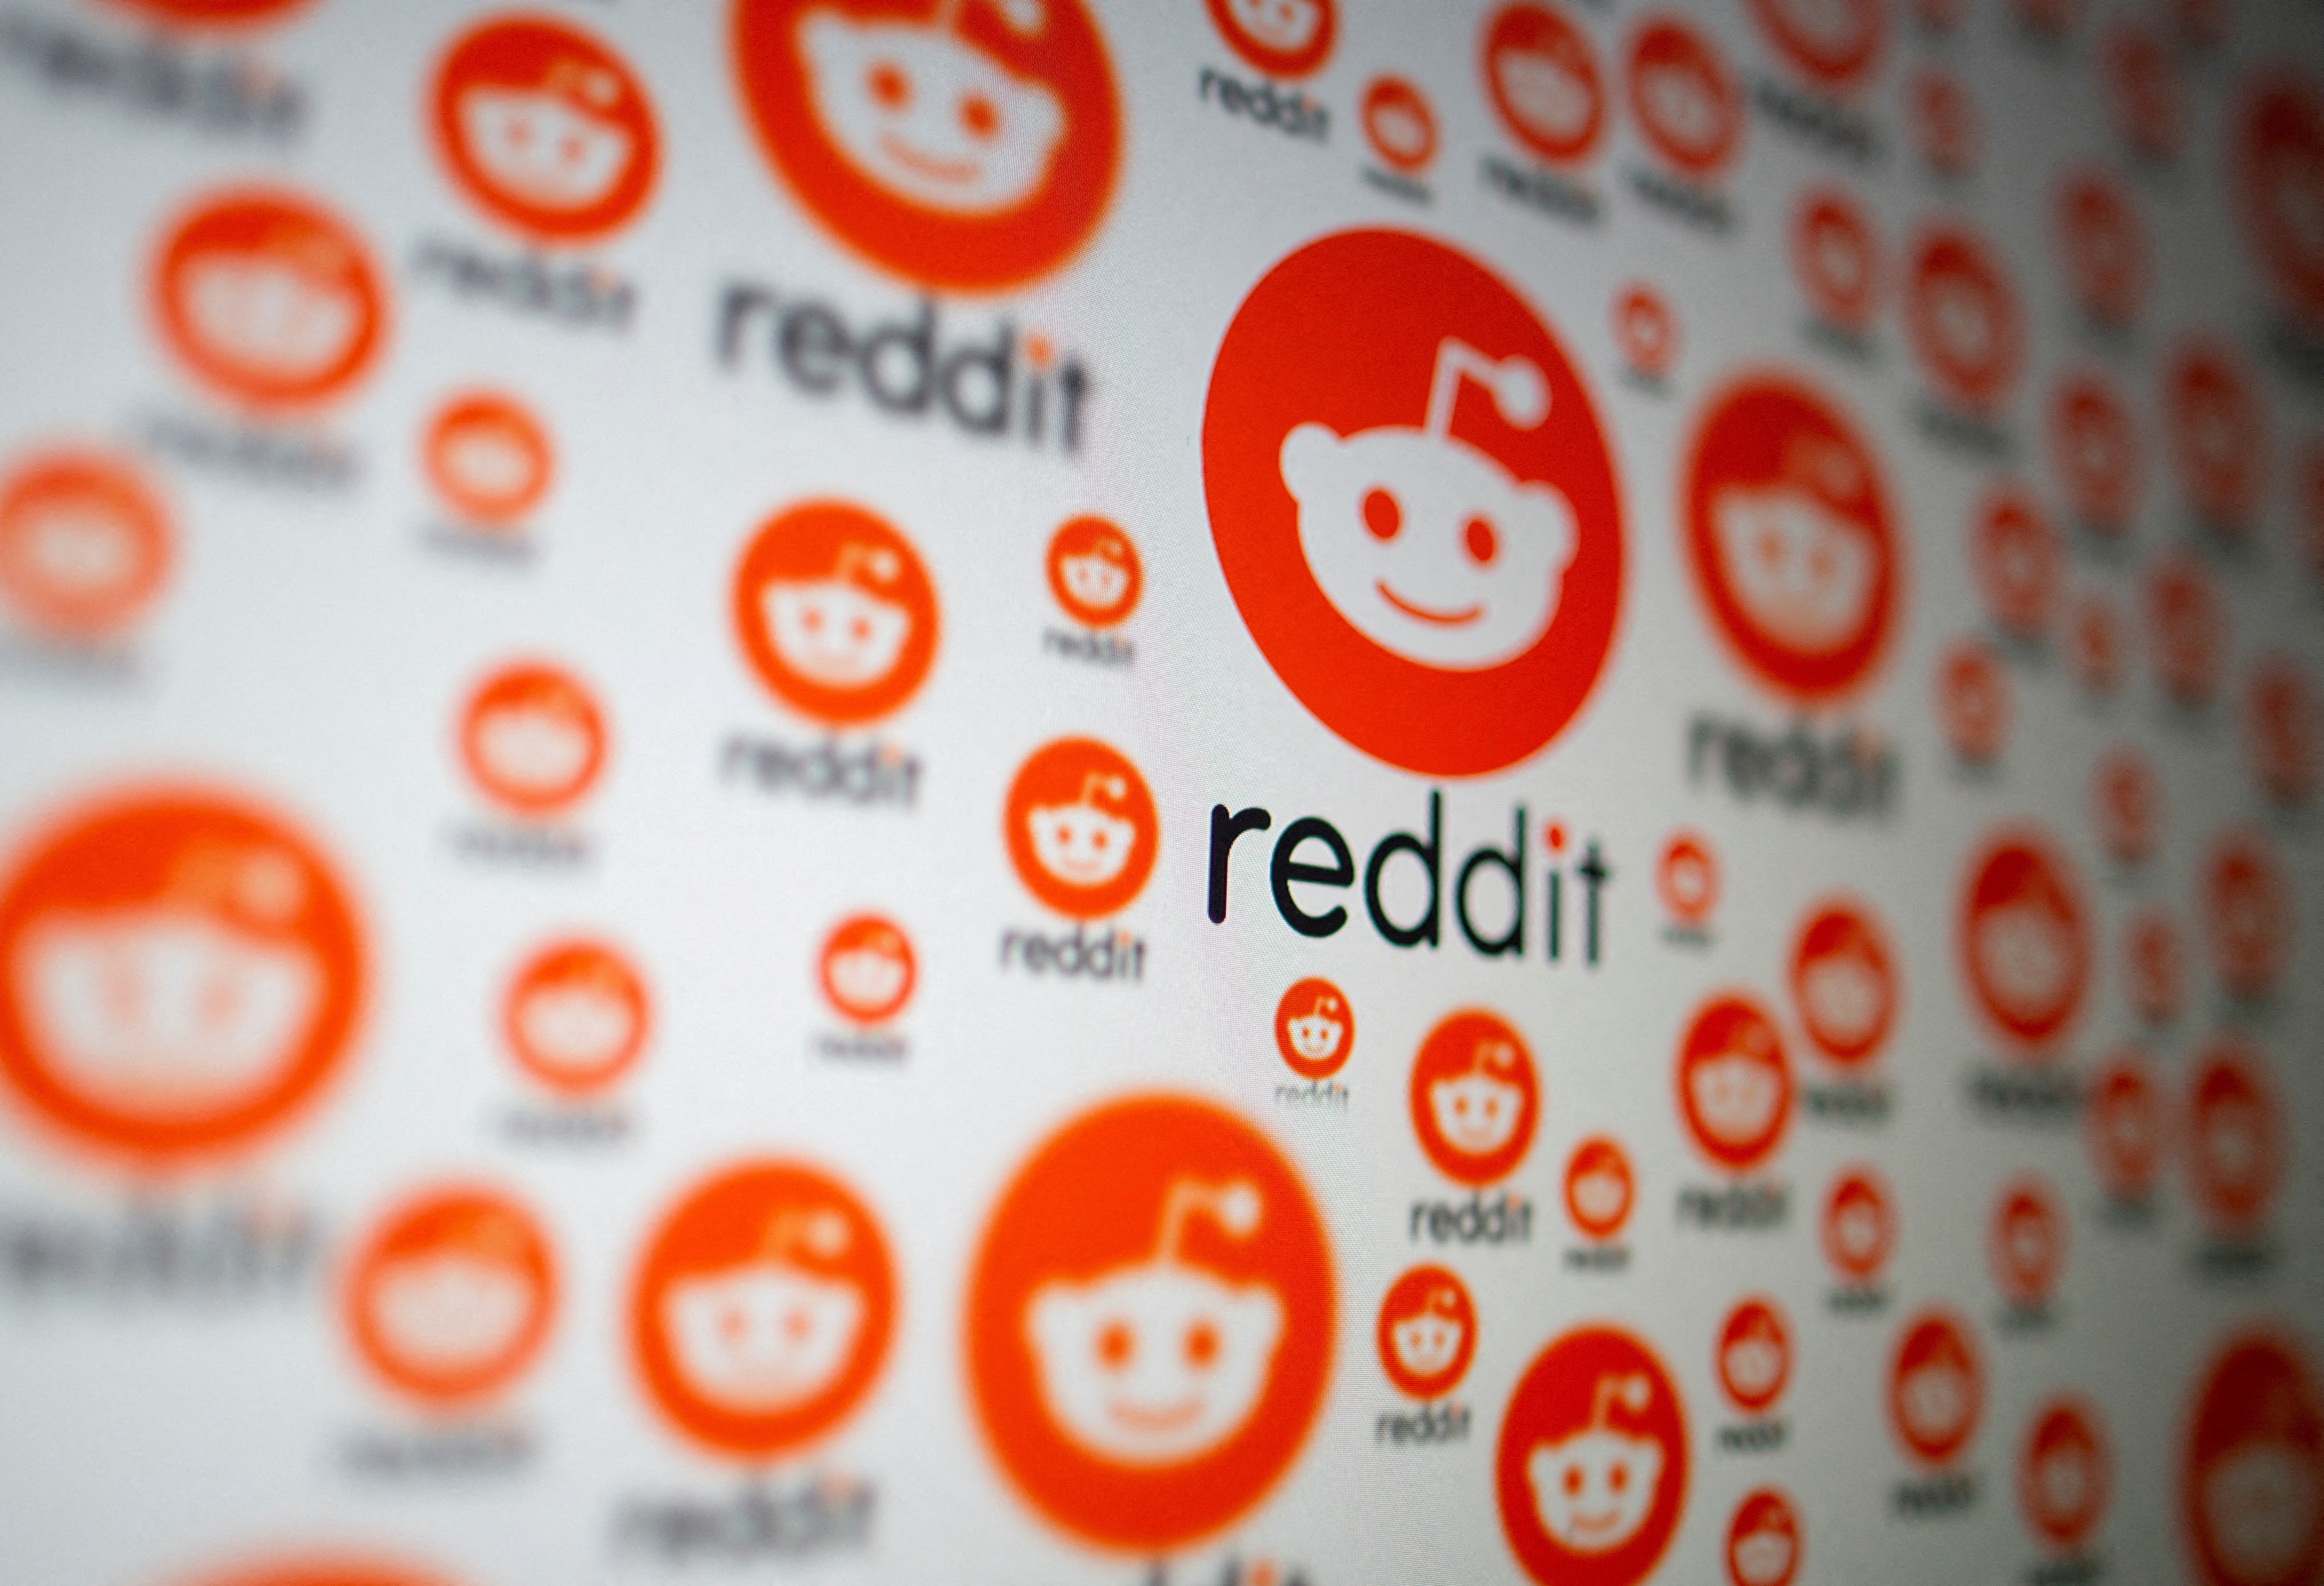 Reddit logos are seen displayed in this illustration